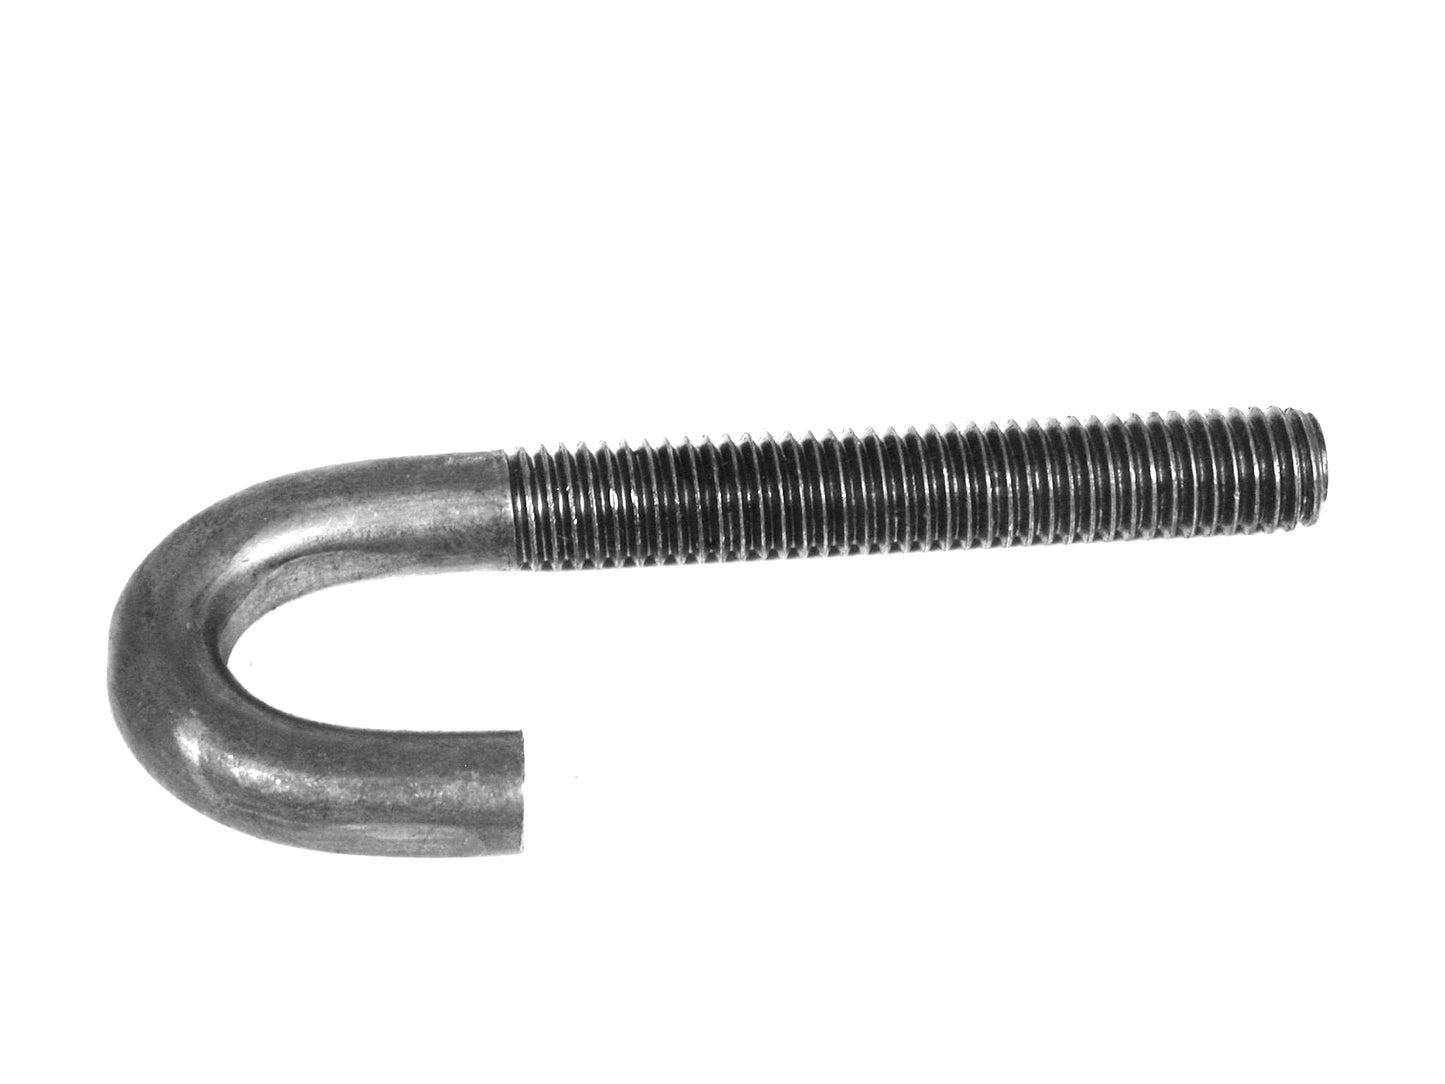 Threaded "J" Bolts - Varying Sizes and Styles